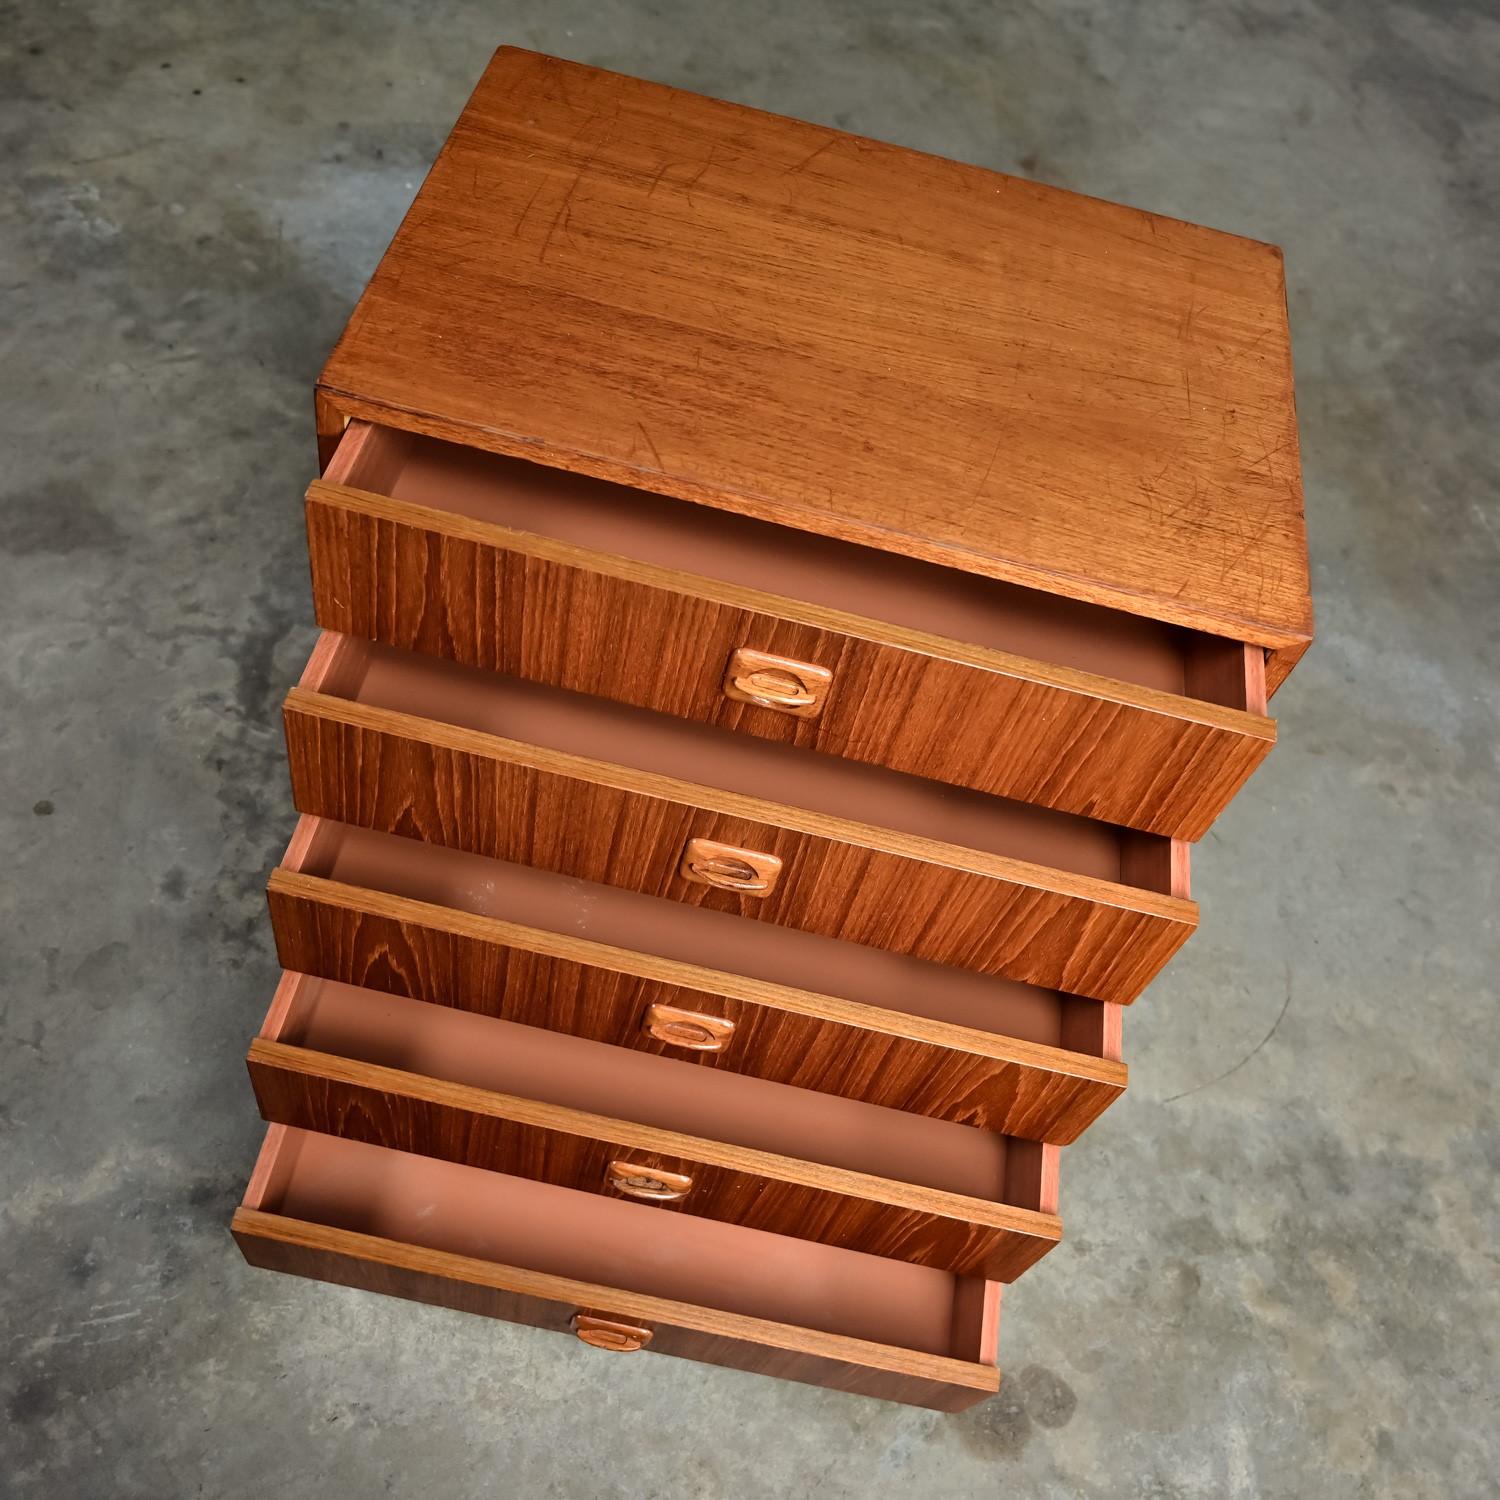 Mid to Late 20th Century Scandinavian Modern Small Teak Cabinet 5 Drawers  For Sale 1